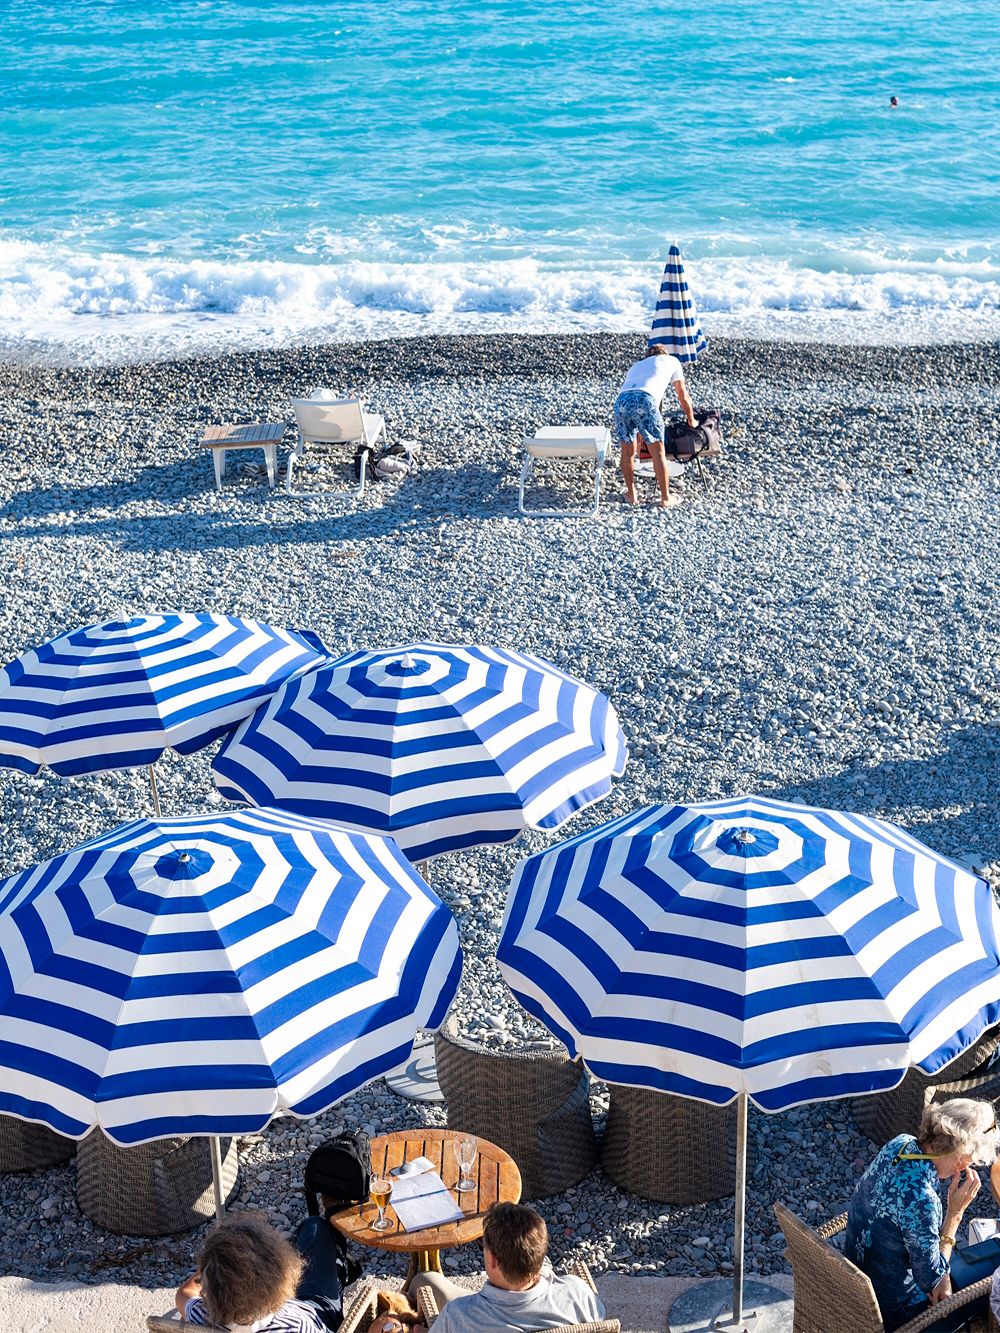 Blue-and-white parasols in Nice